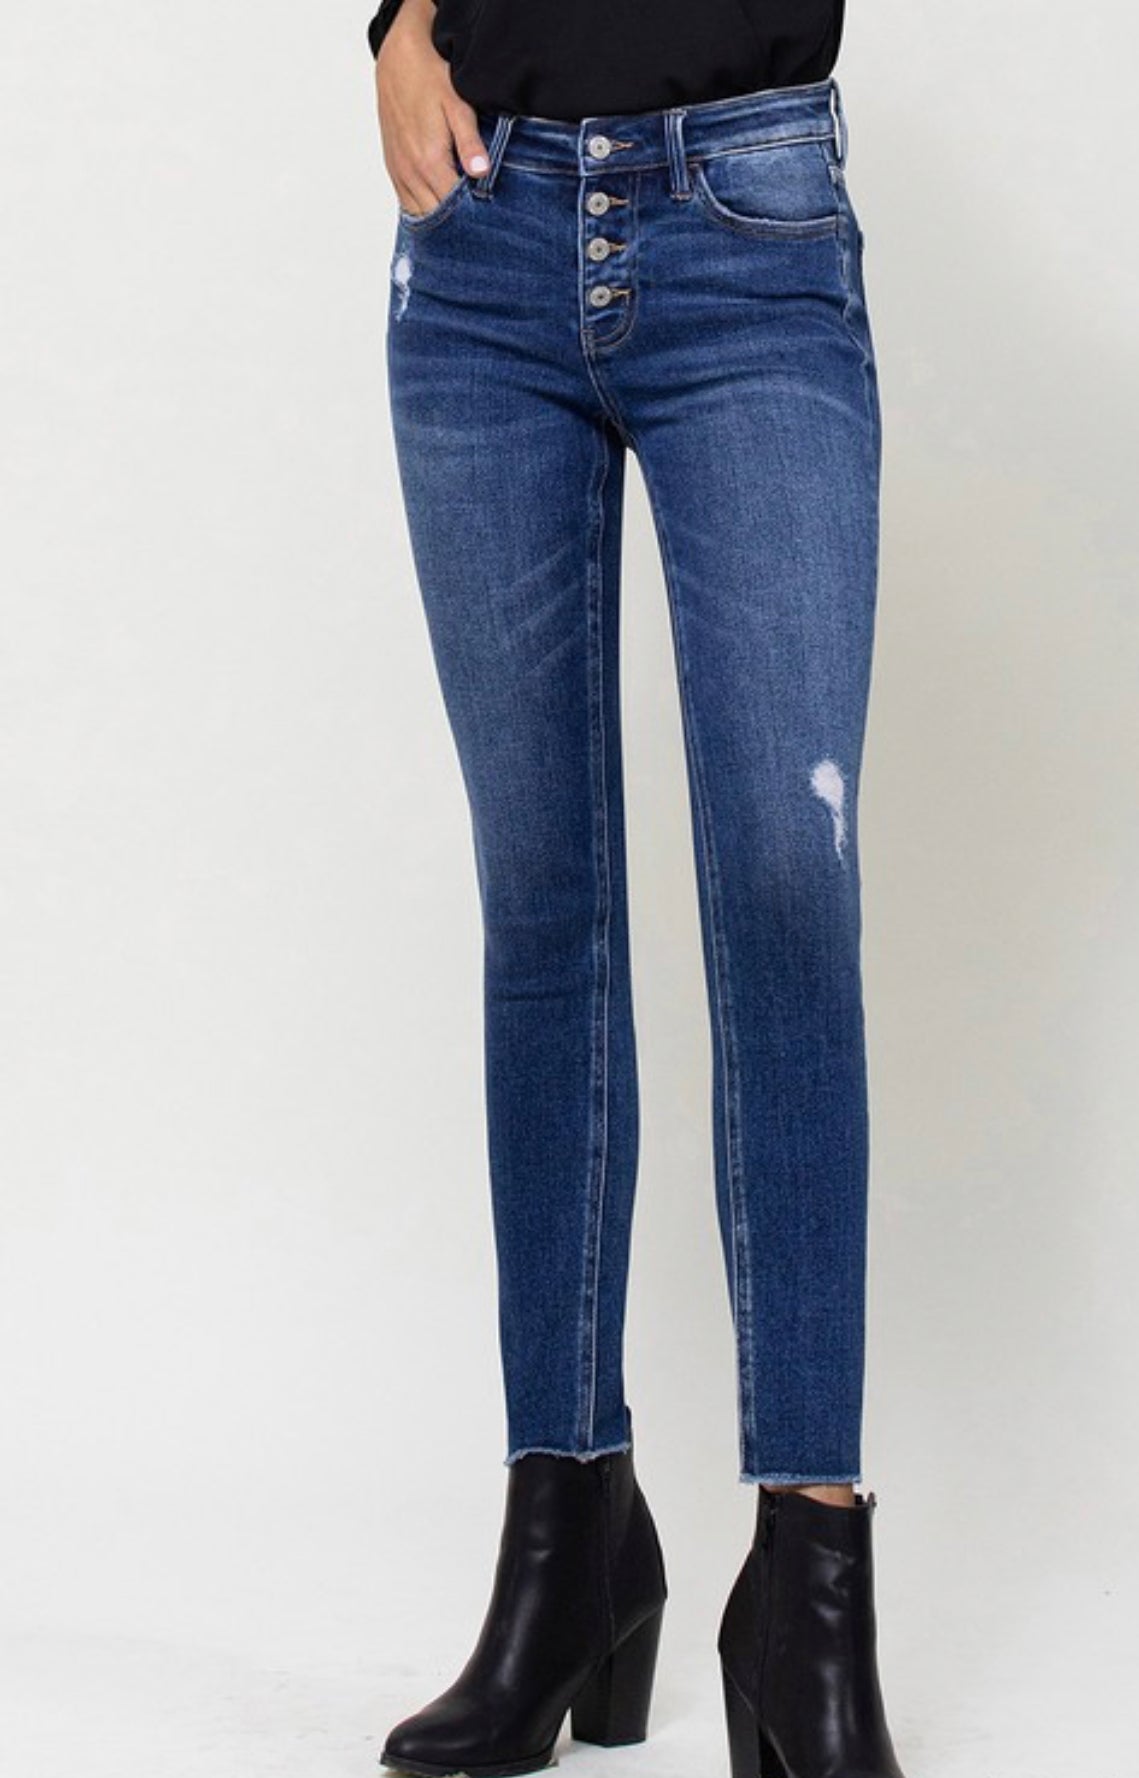 Surf Rider Mid Rise Button Fly Skinny Jeans